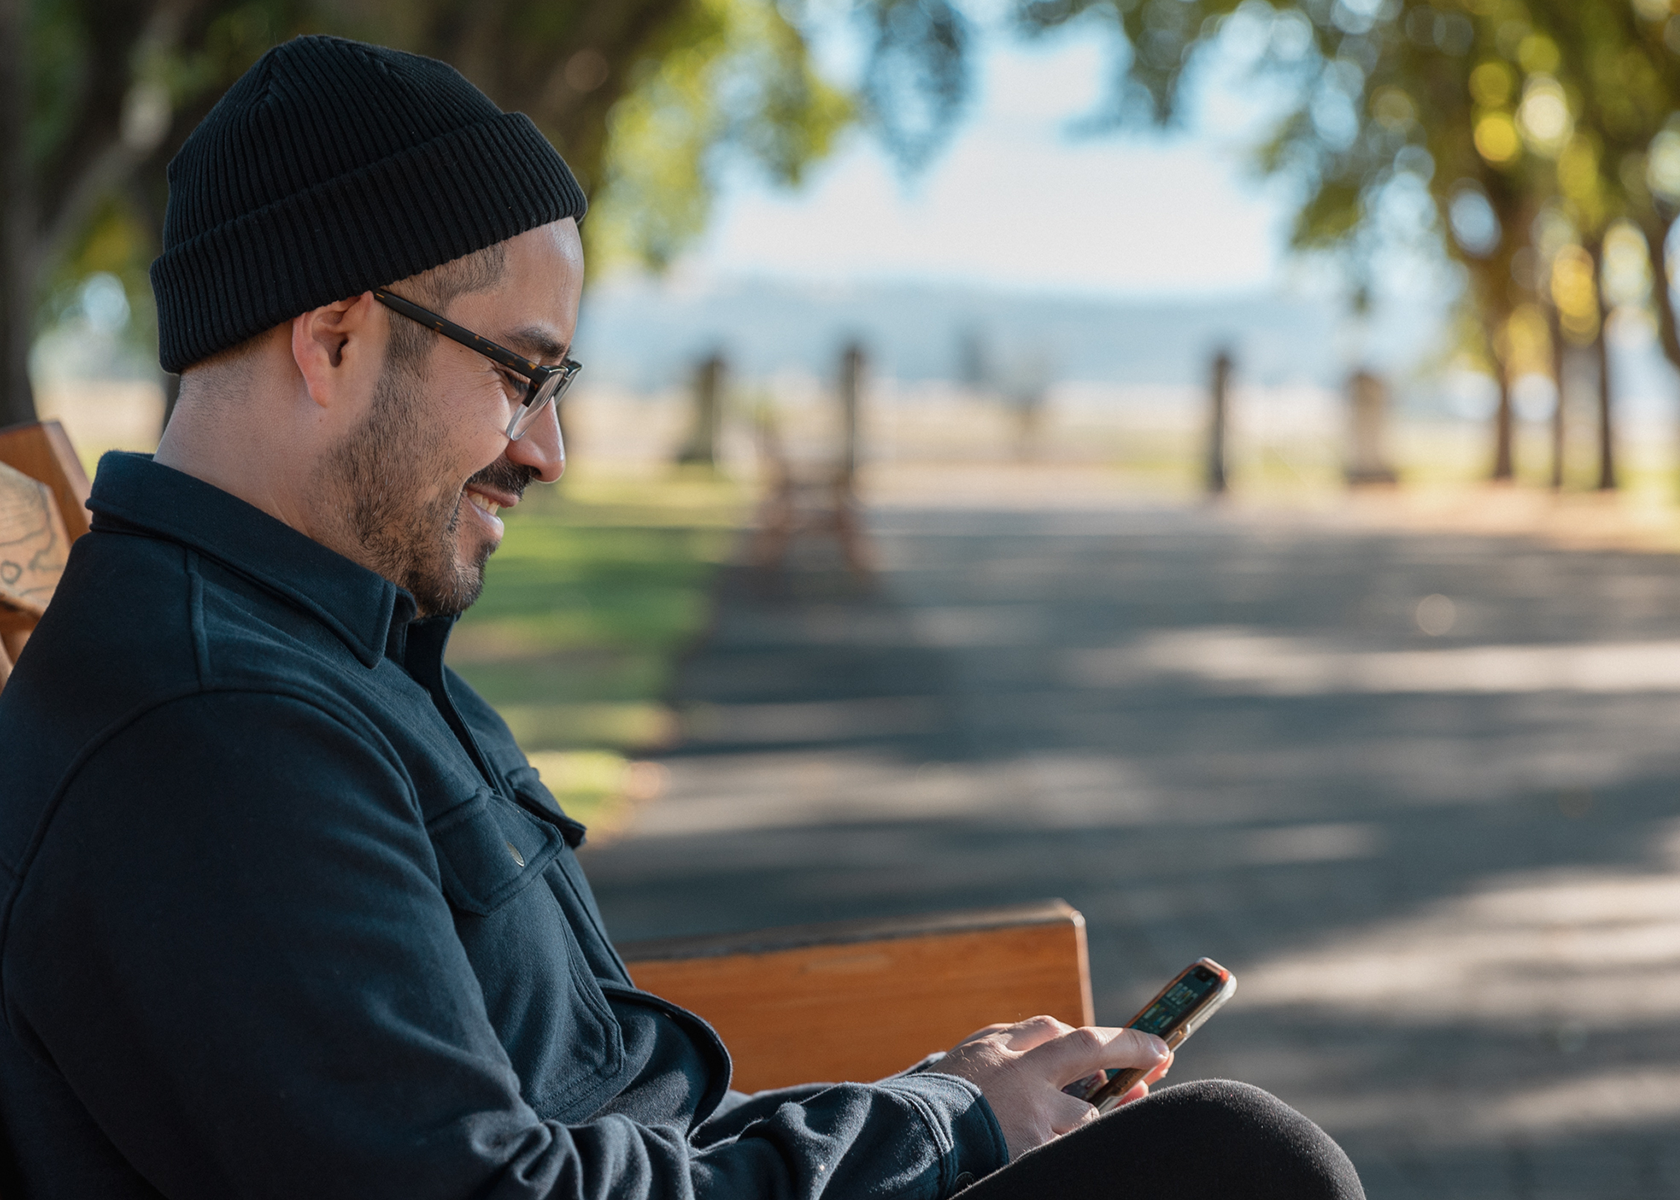 A man sits on a bench and looks at his phone smiling